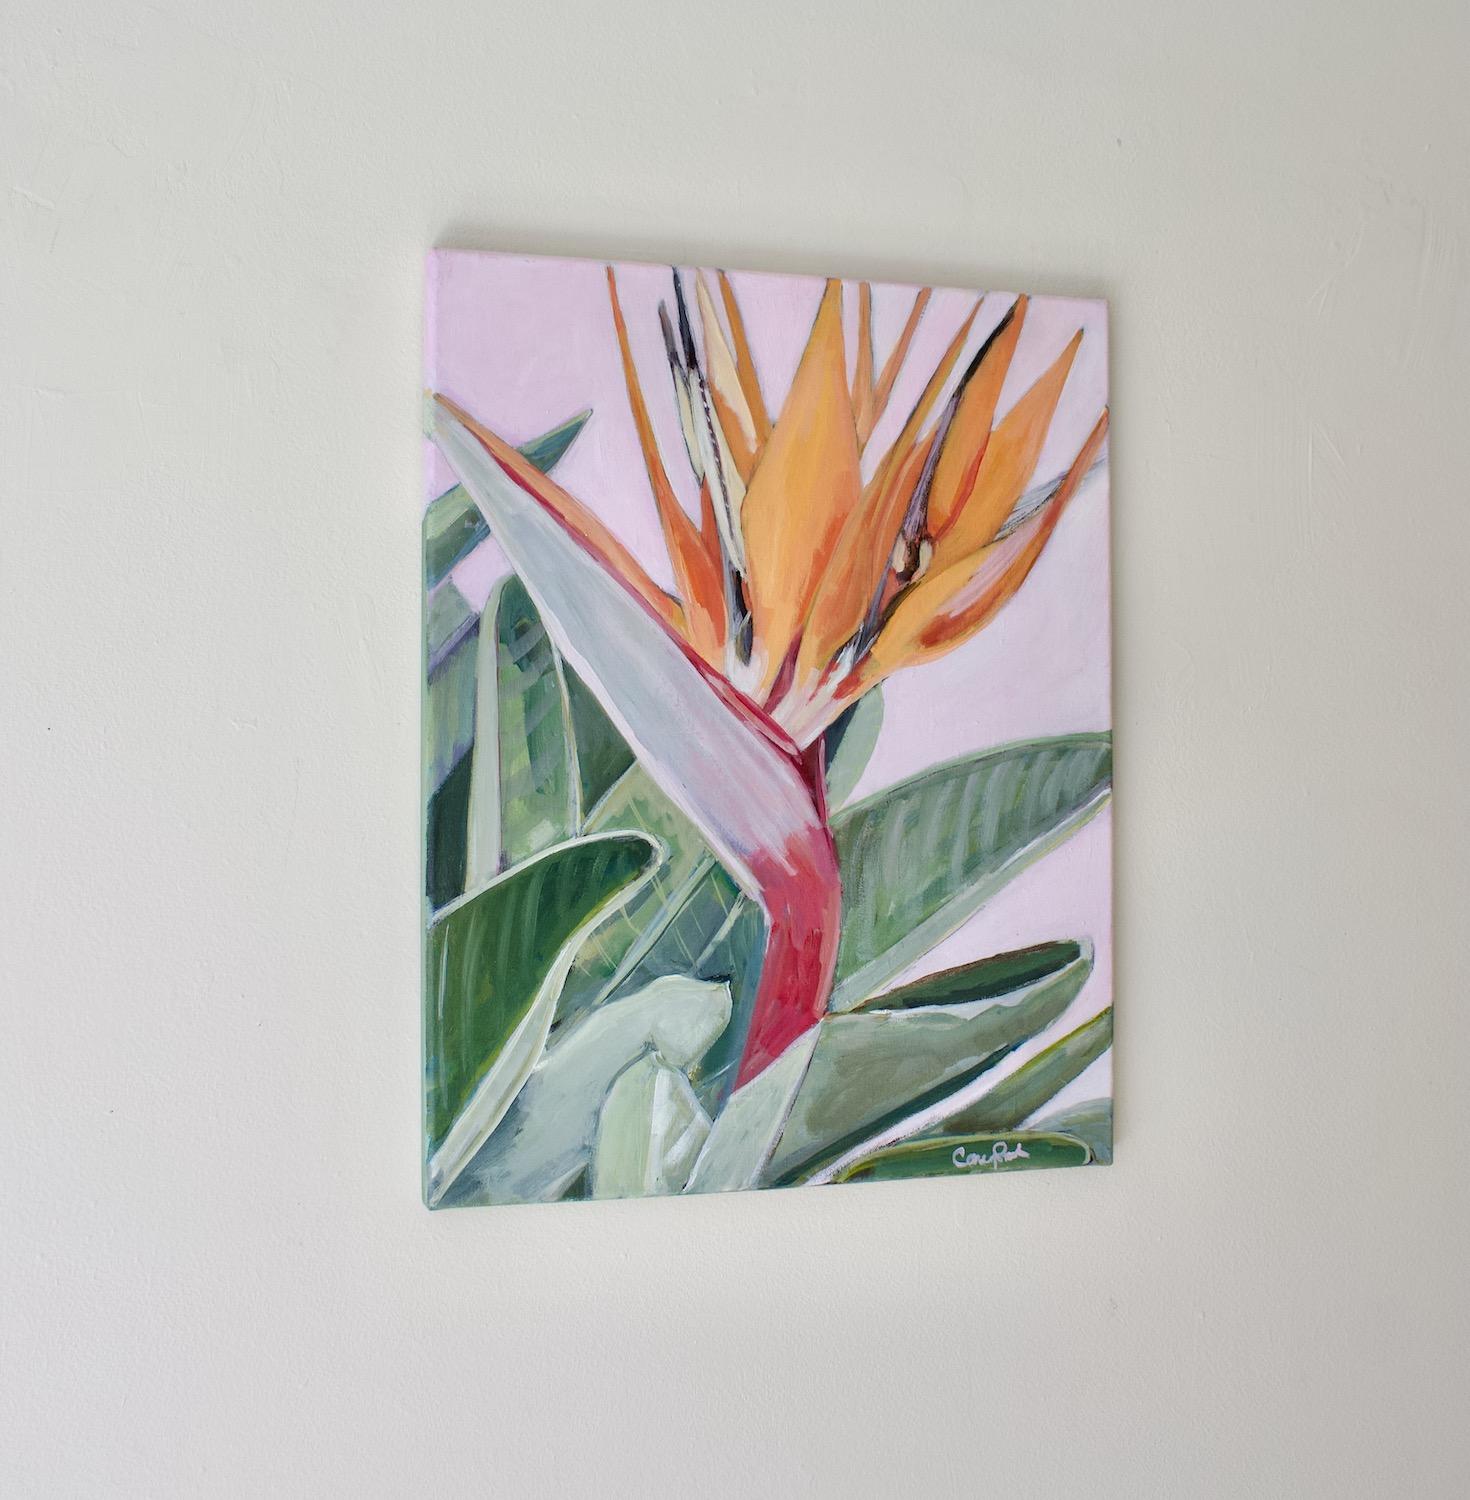 <p>Artist Comments<br>A bird of paradise charms with its beauty. Its fiery petals contrast vividly with the lush green leaves. Inspired by her photograph taken during a stroll in Santa Monica, artist Carey Parks depicts the flower in full bloom,